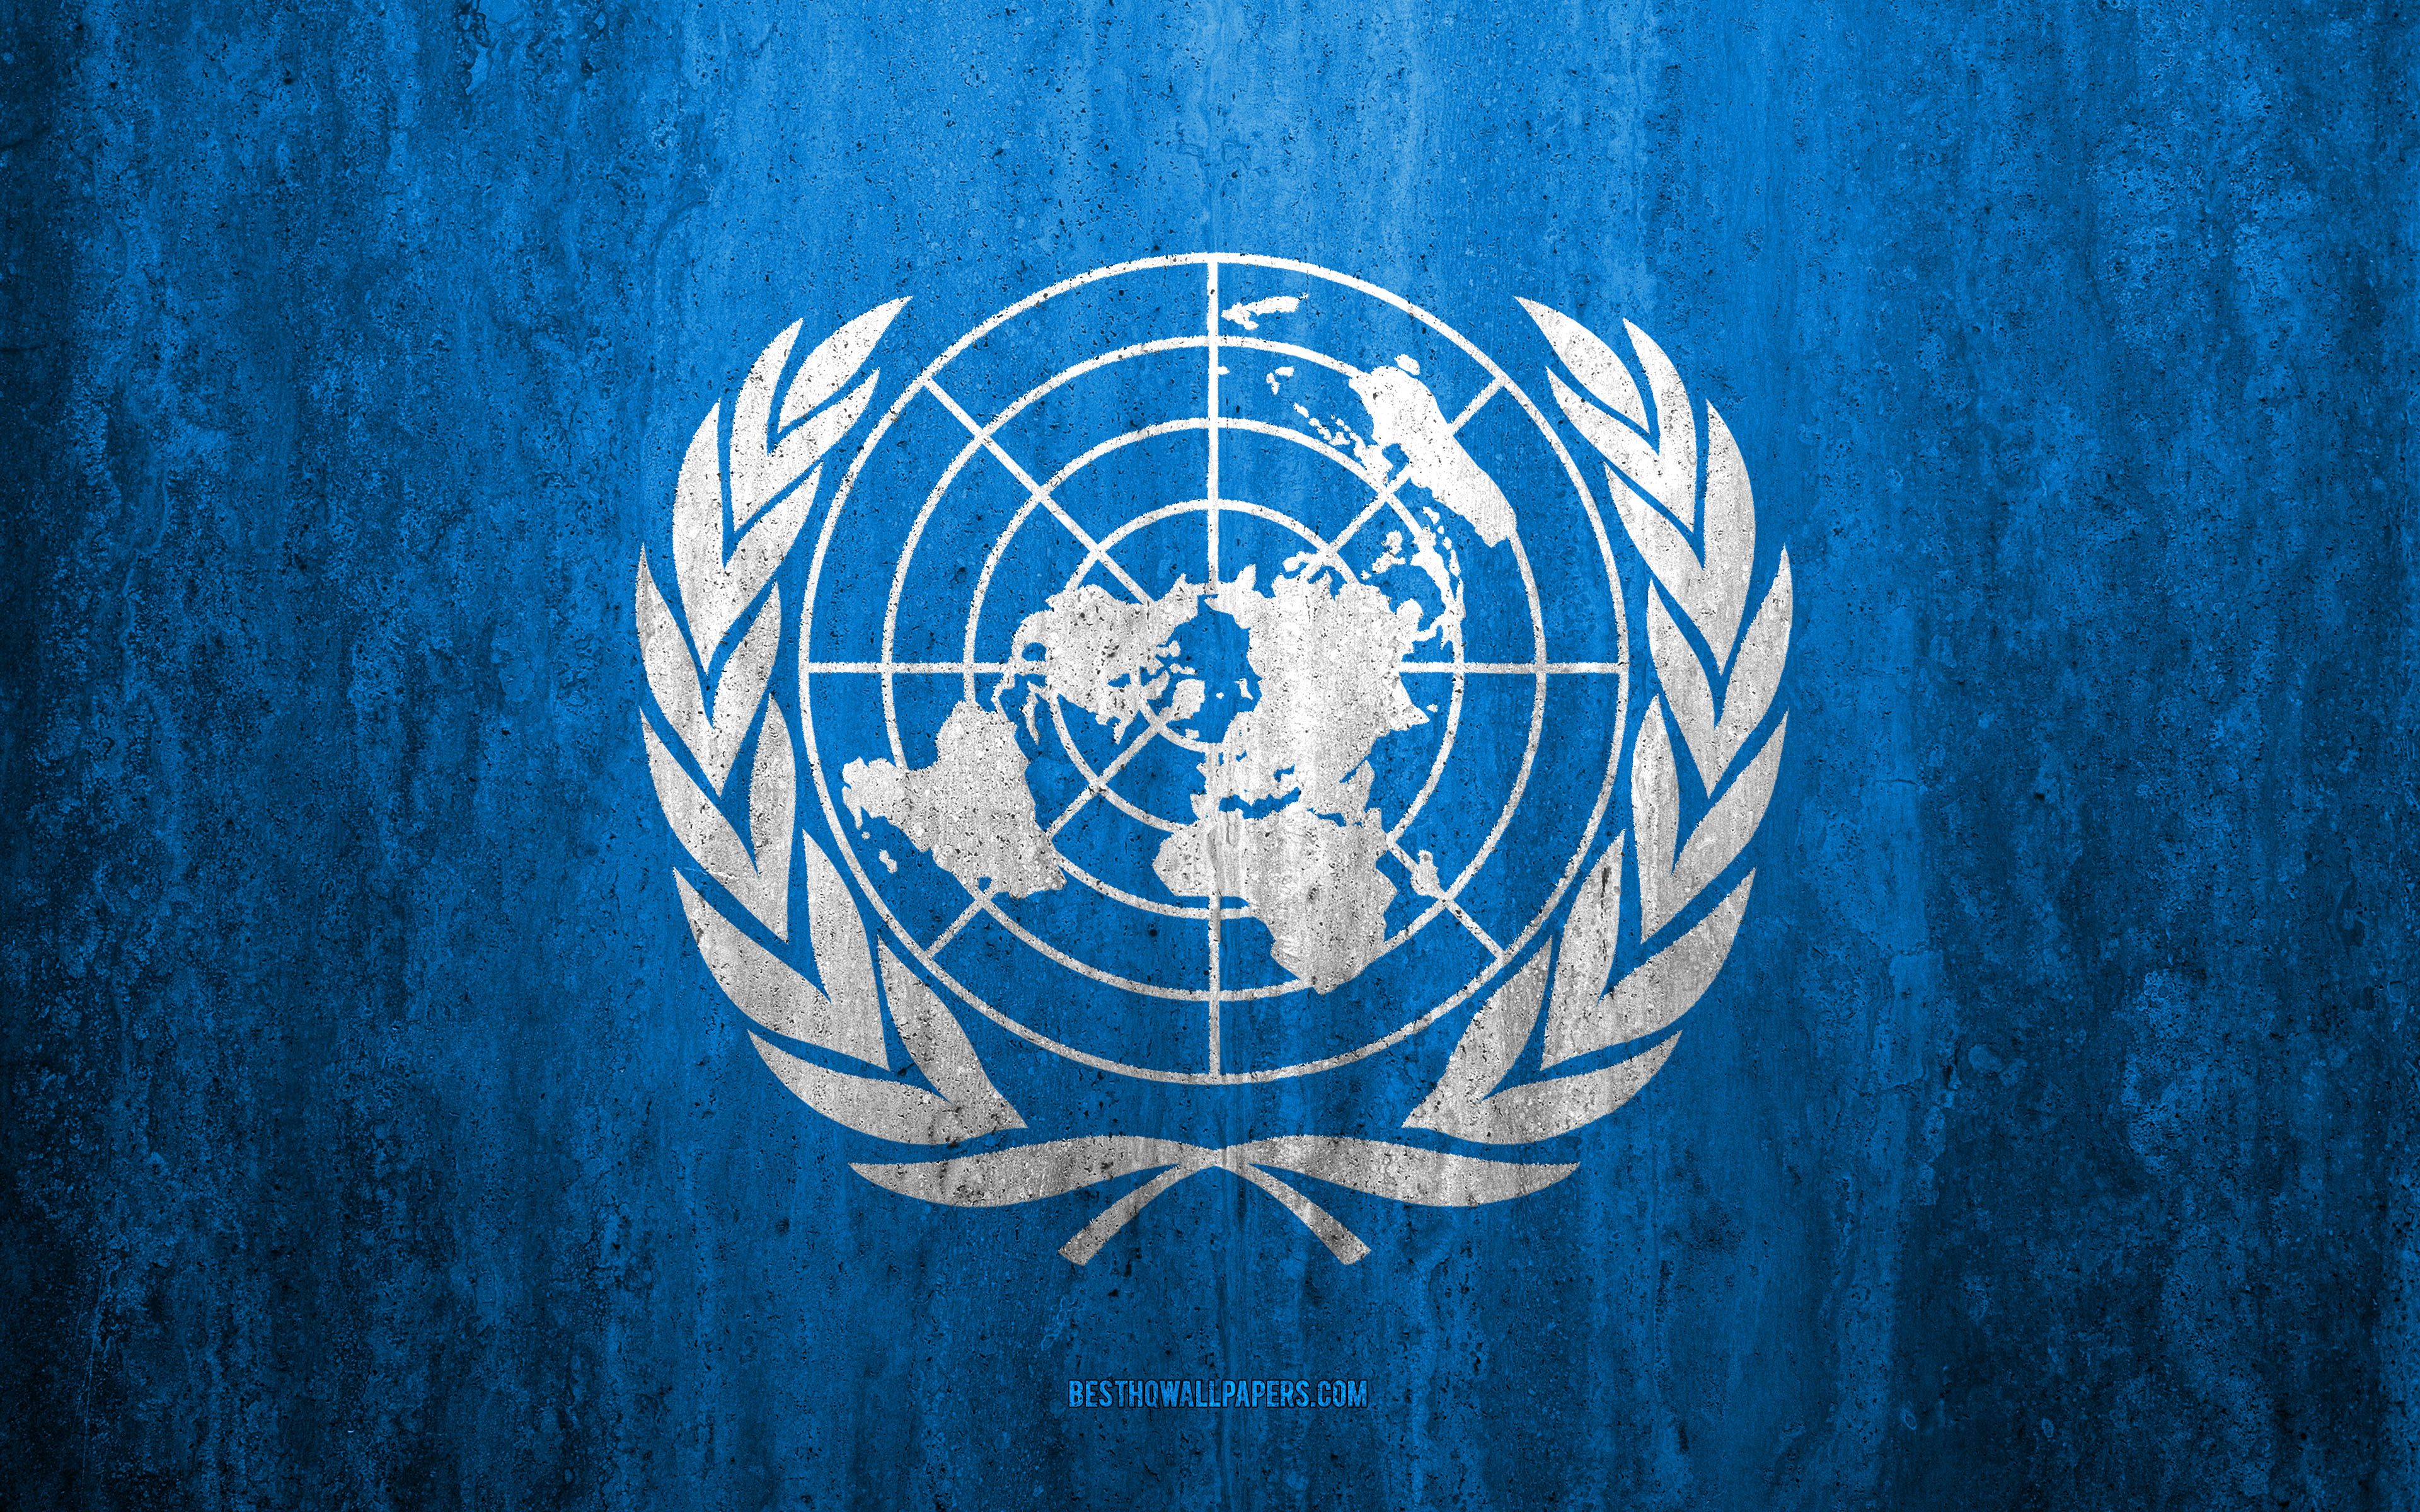 Download wallpaper Flag of United Nations, 4k, stone background, grunge flag, international organizations, UN flag, grunge art, symbols, United Nations, stone texture for desktop with resolution 3840x2400. High Quality HD picture wallpaper